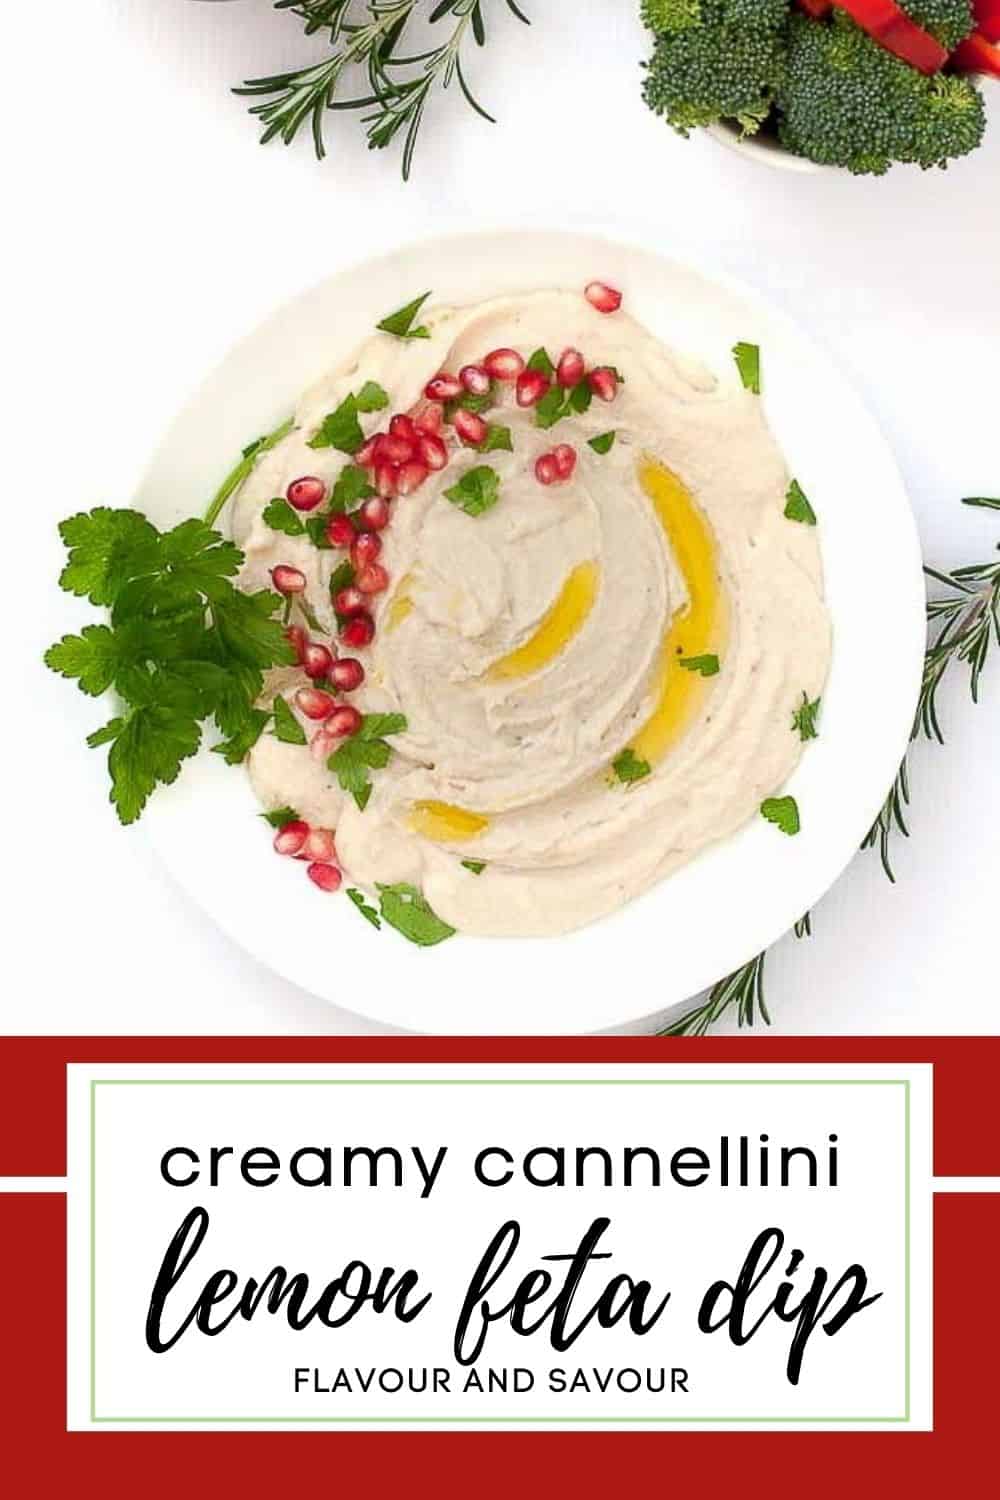 image and text for cream cannellini lemon feta dip